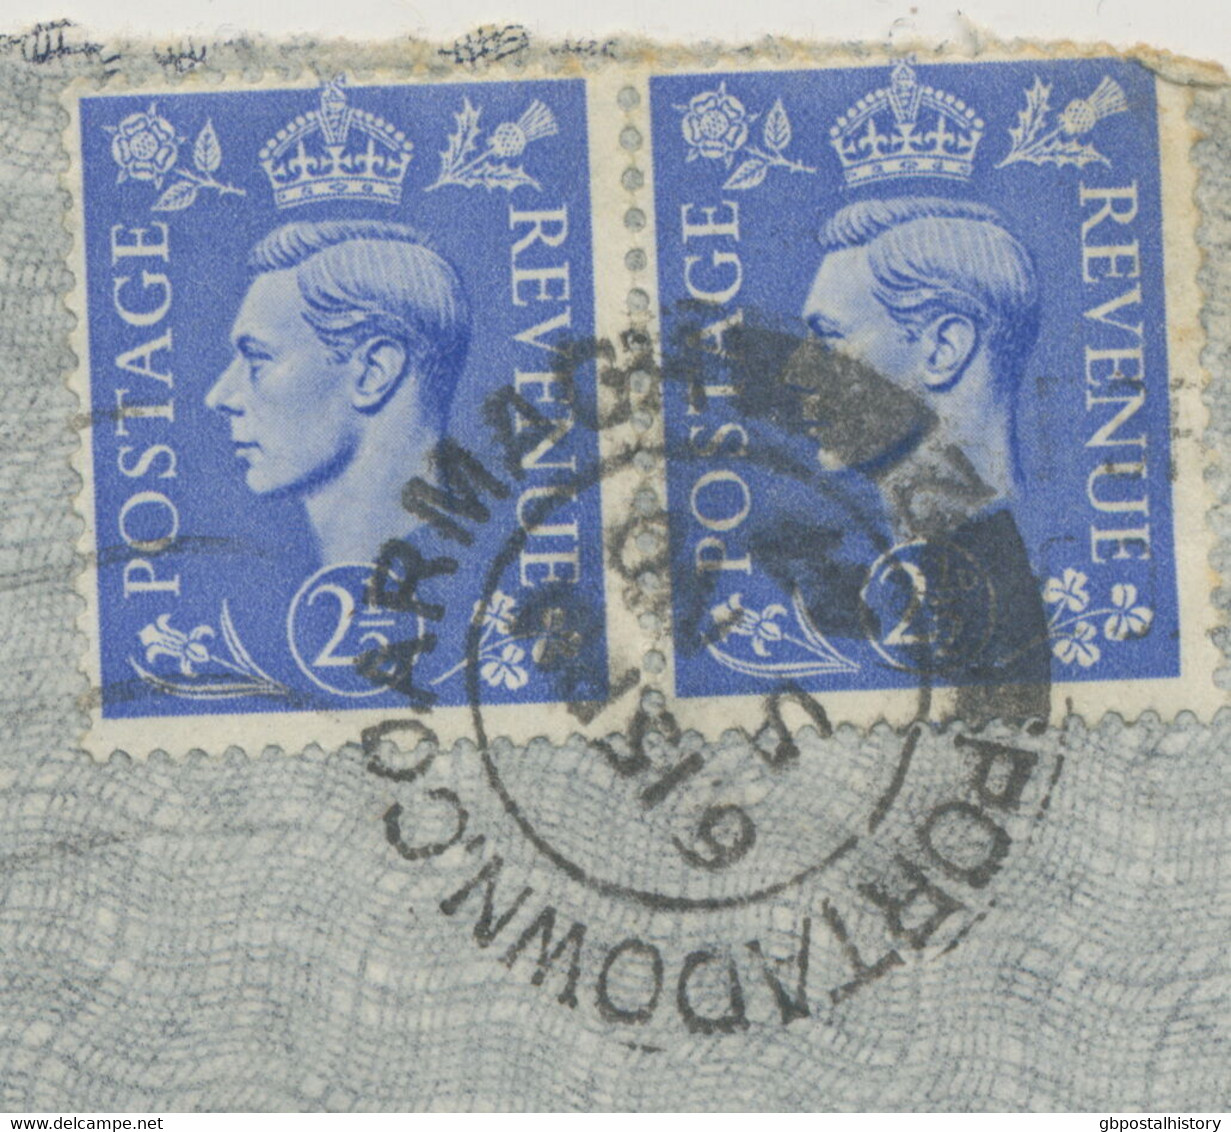 GB „PORTADOWN.CO.ARMAGH / 2“ Double Ring (25 Mm) Airmail Cover To Switzerland - Irlande Du Nord